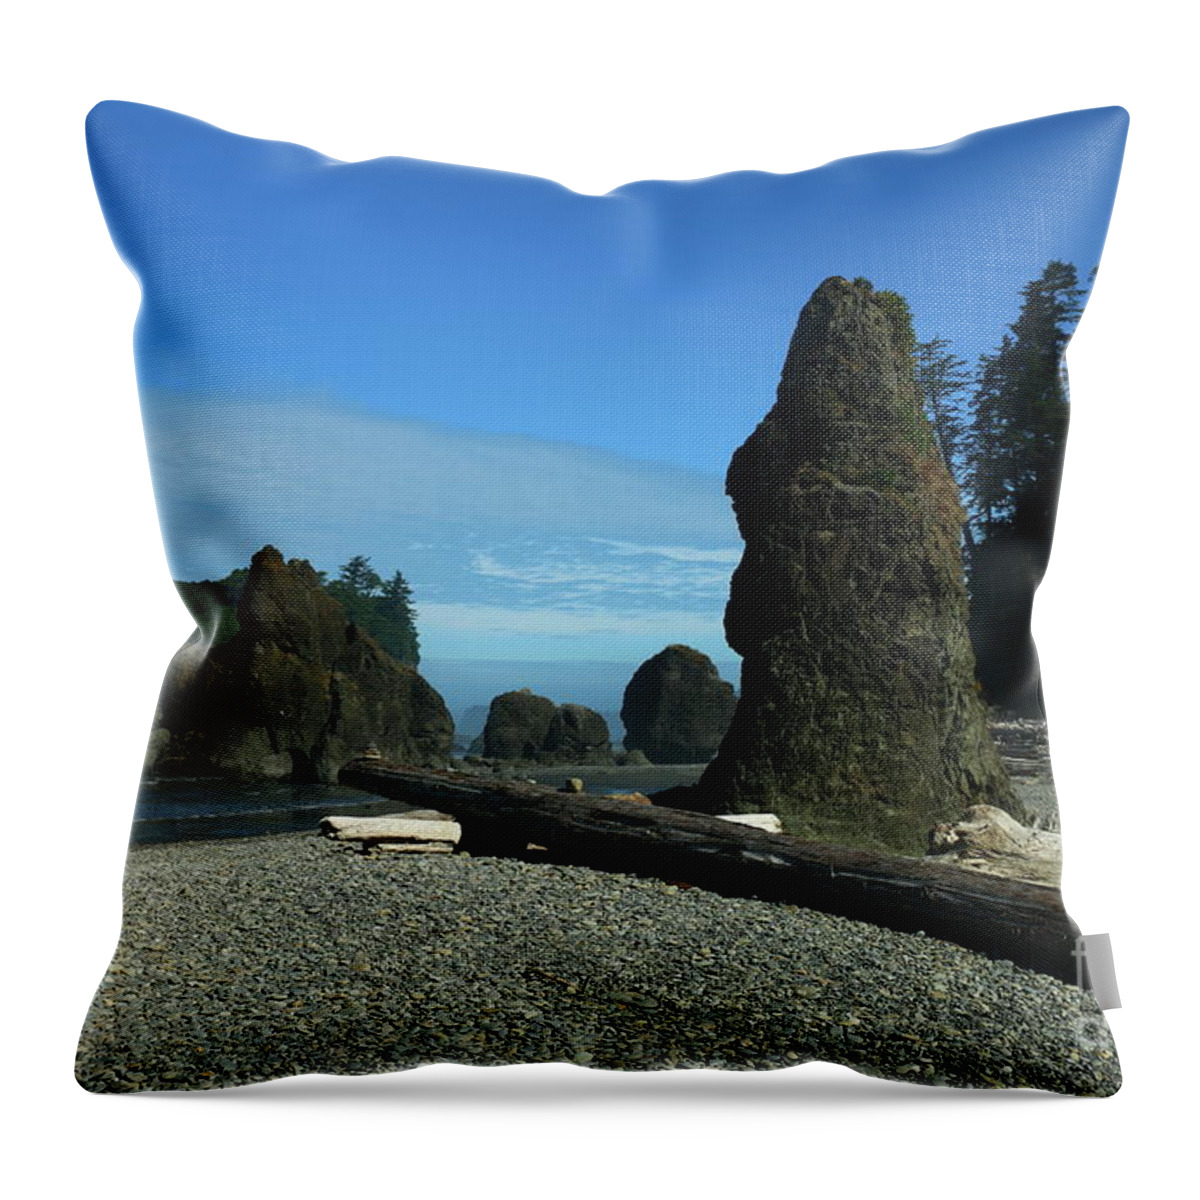  Beach Throw Pillow featuring the photograph Morning Has Broken by Christiane Schulze Art And Photography